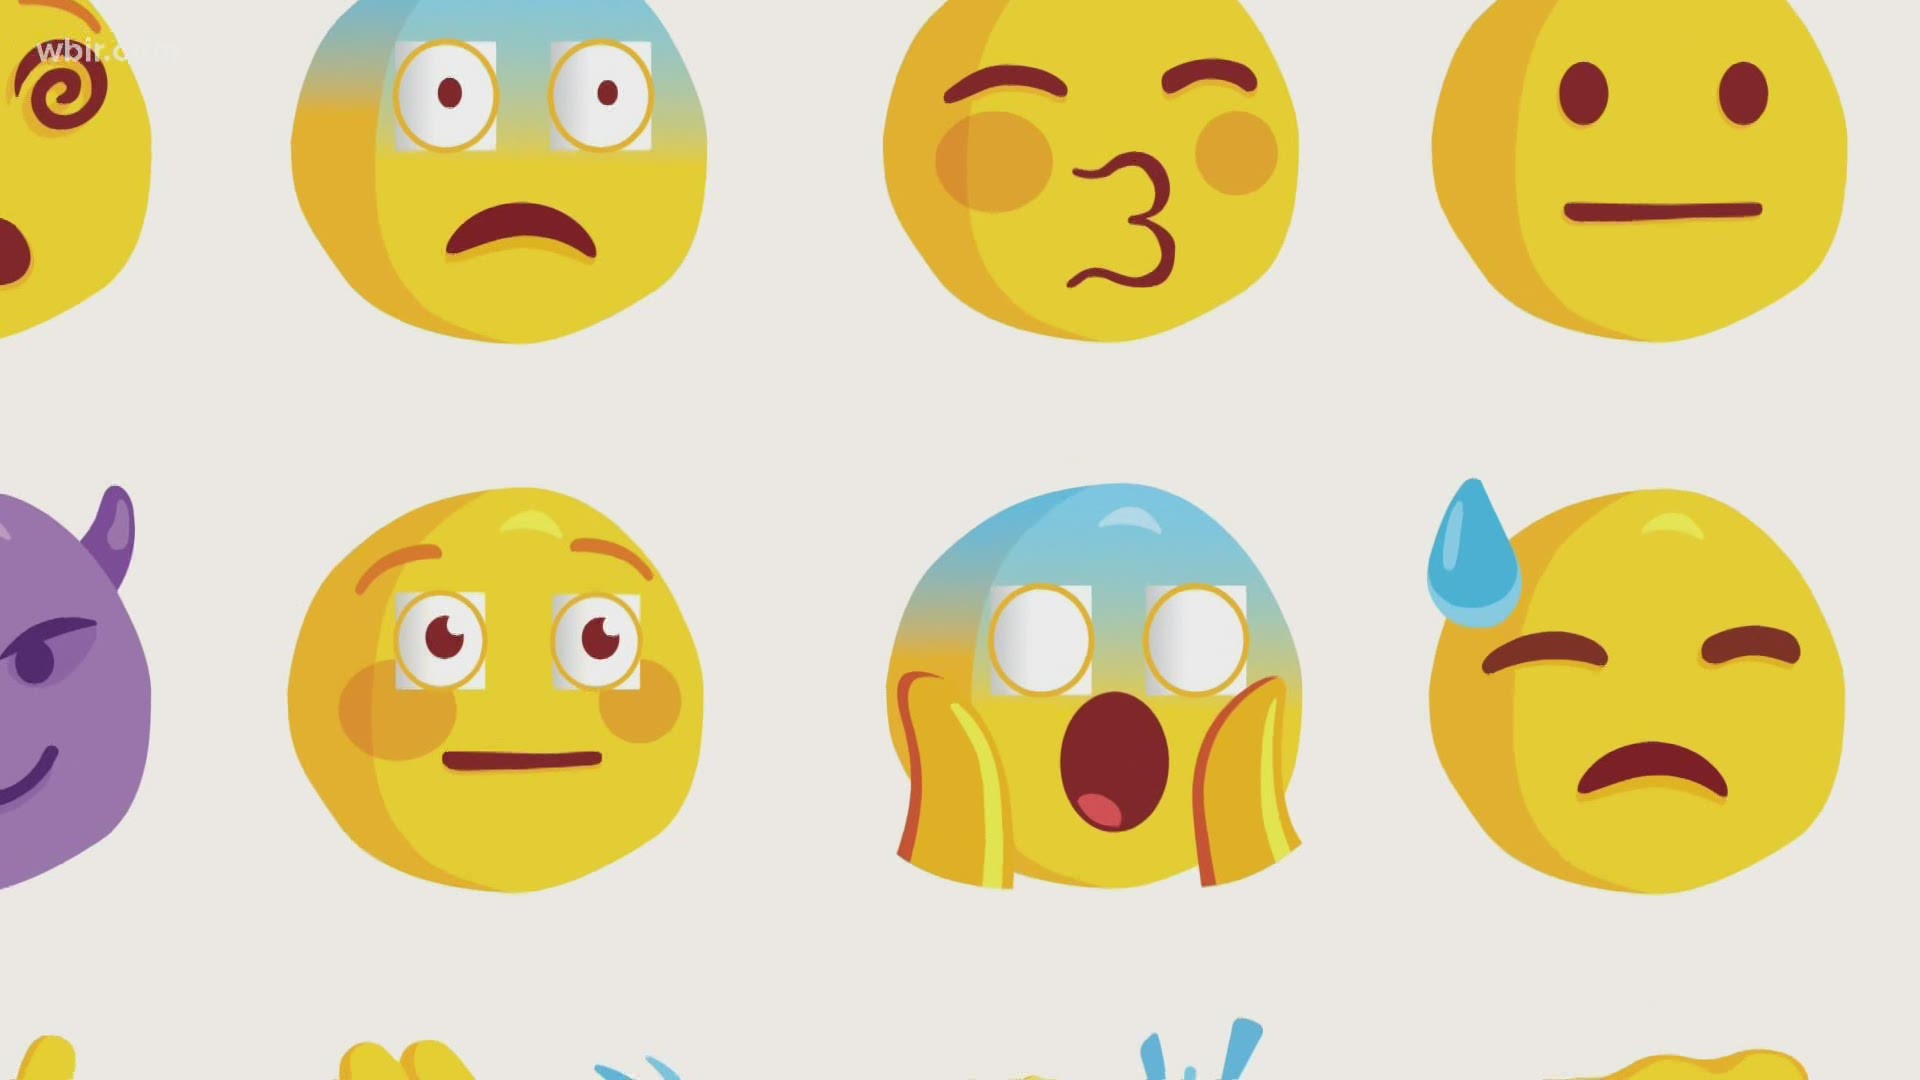 Researchers at the University of Tennessee released a study on why some emojis are added each year and other requests are denied. Aug. 10, 2020-4pm.